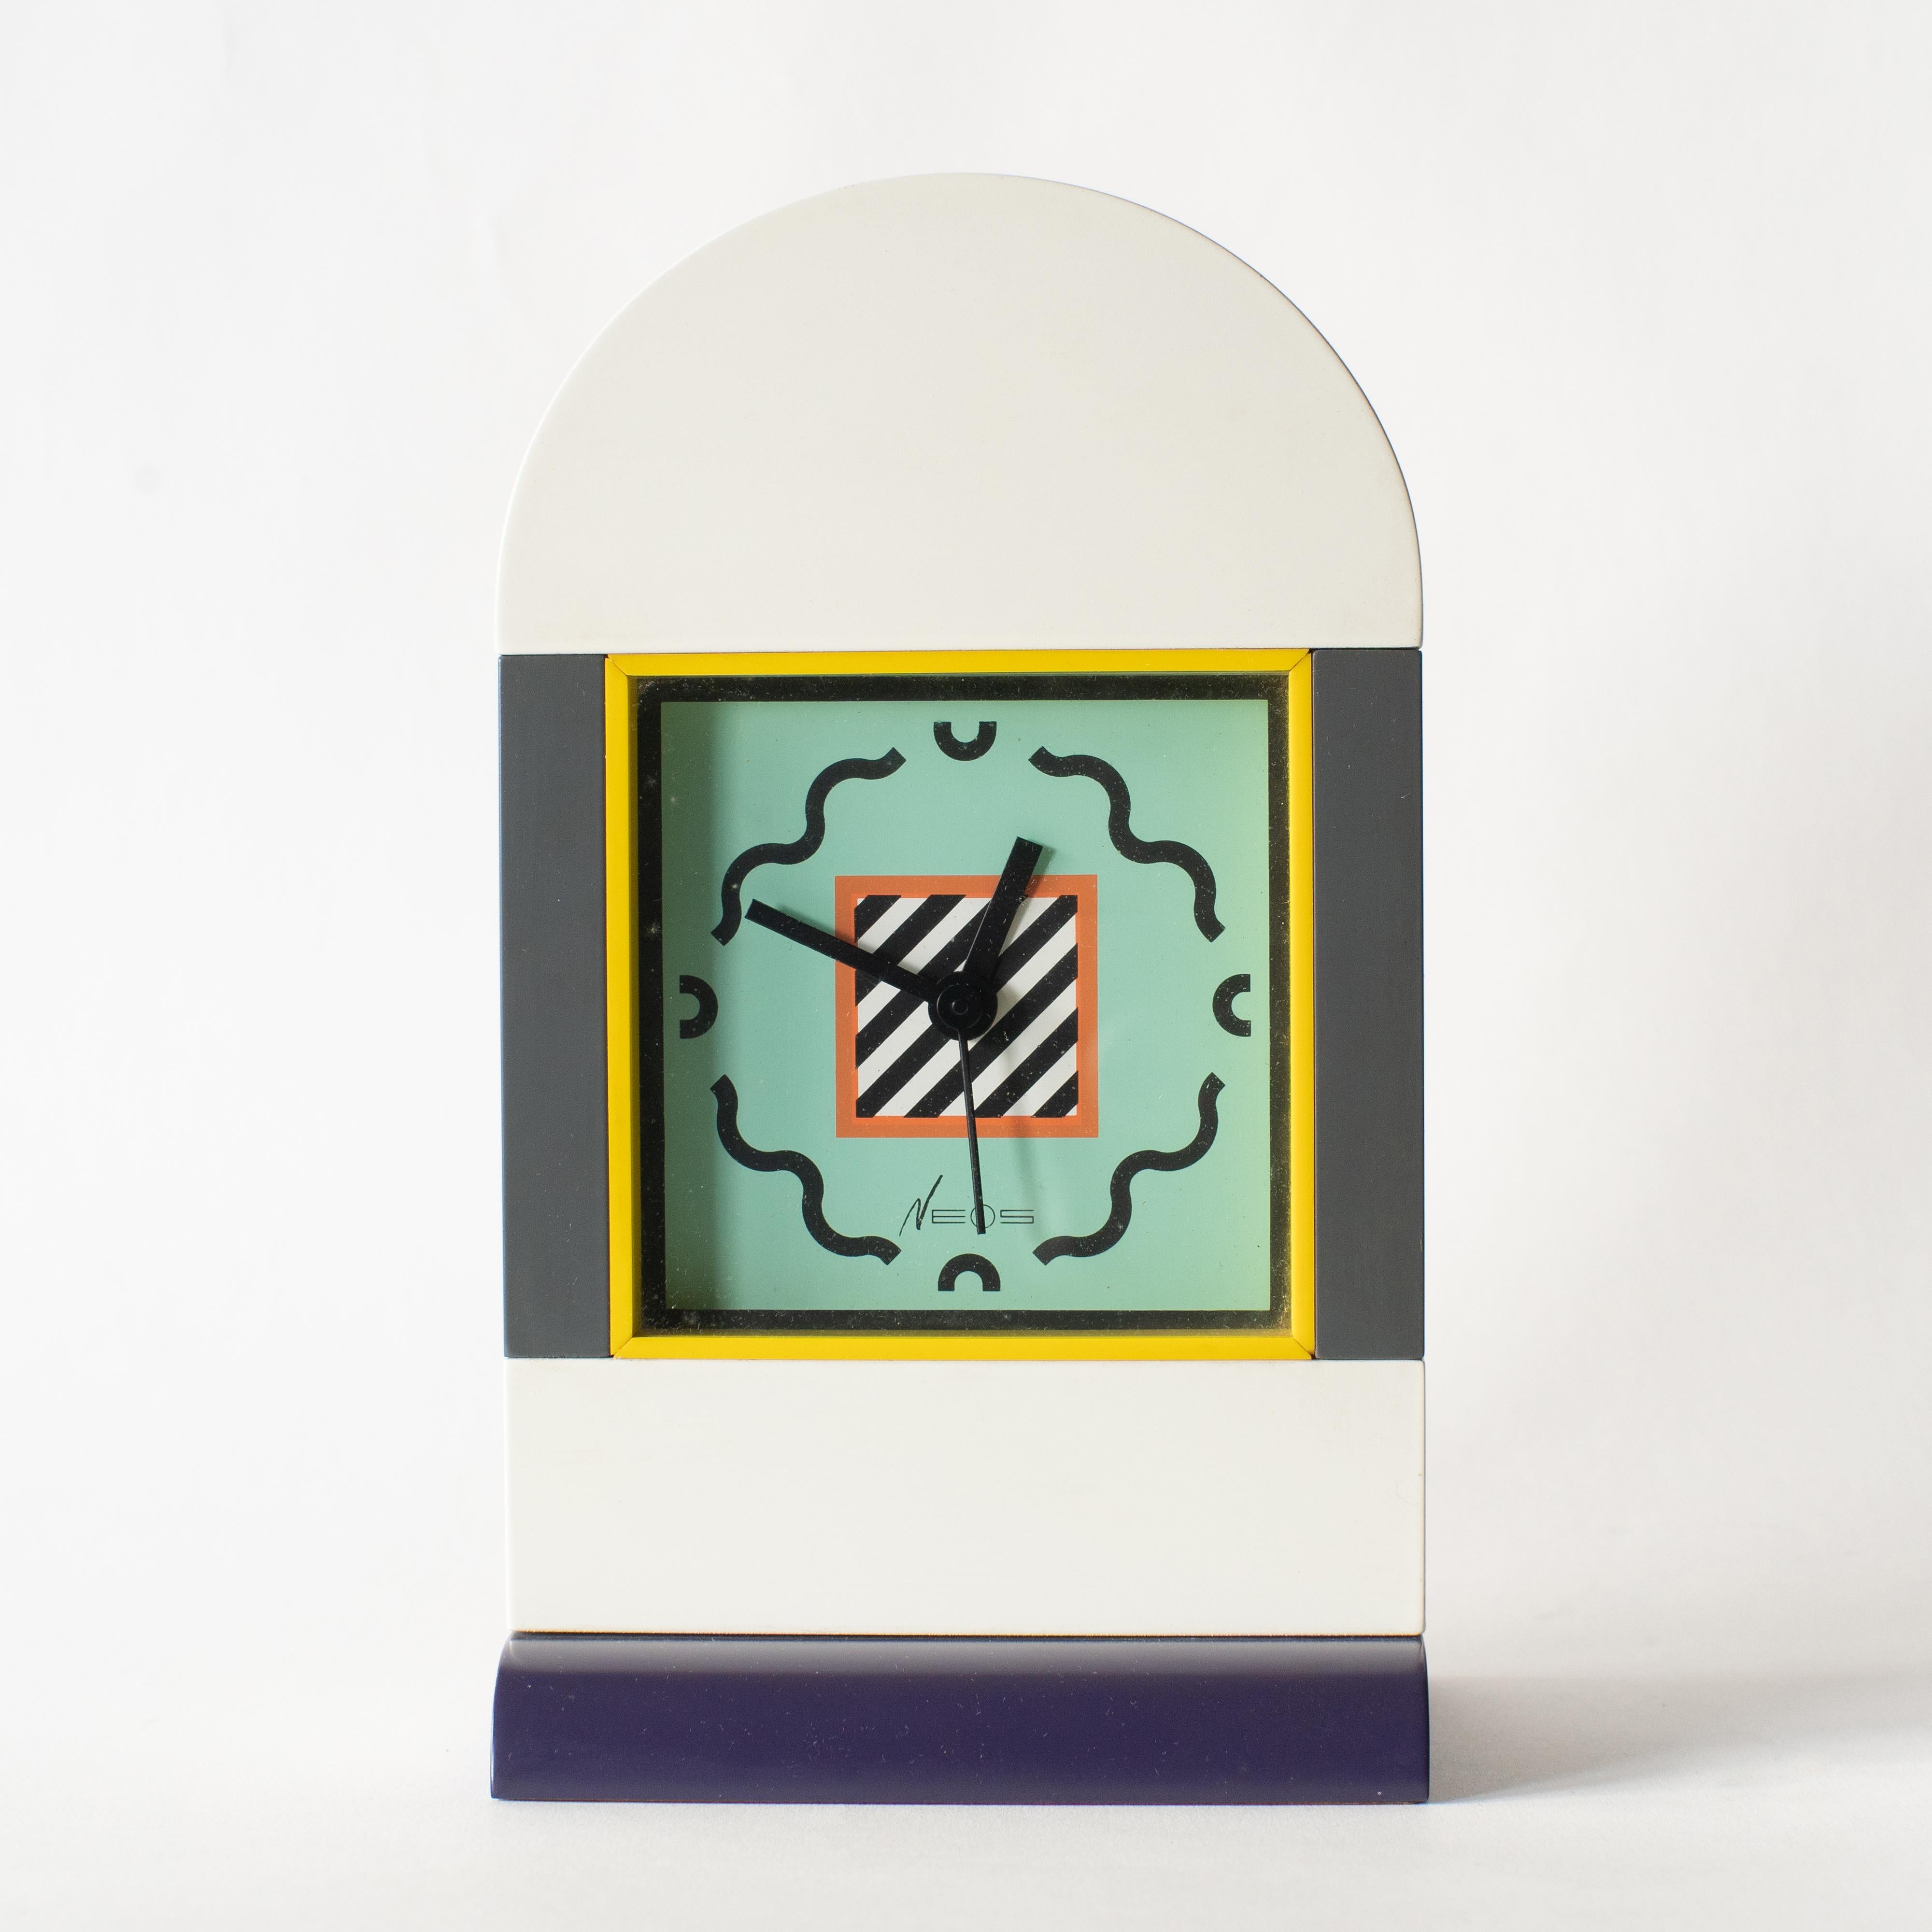 Neos clock designed by George Sowden and Nathalie du Pasquier. 
Working with original box. 

